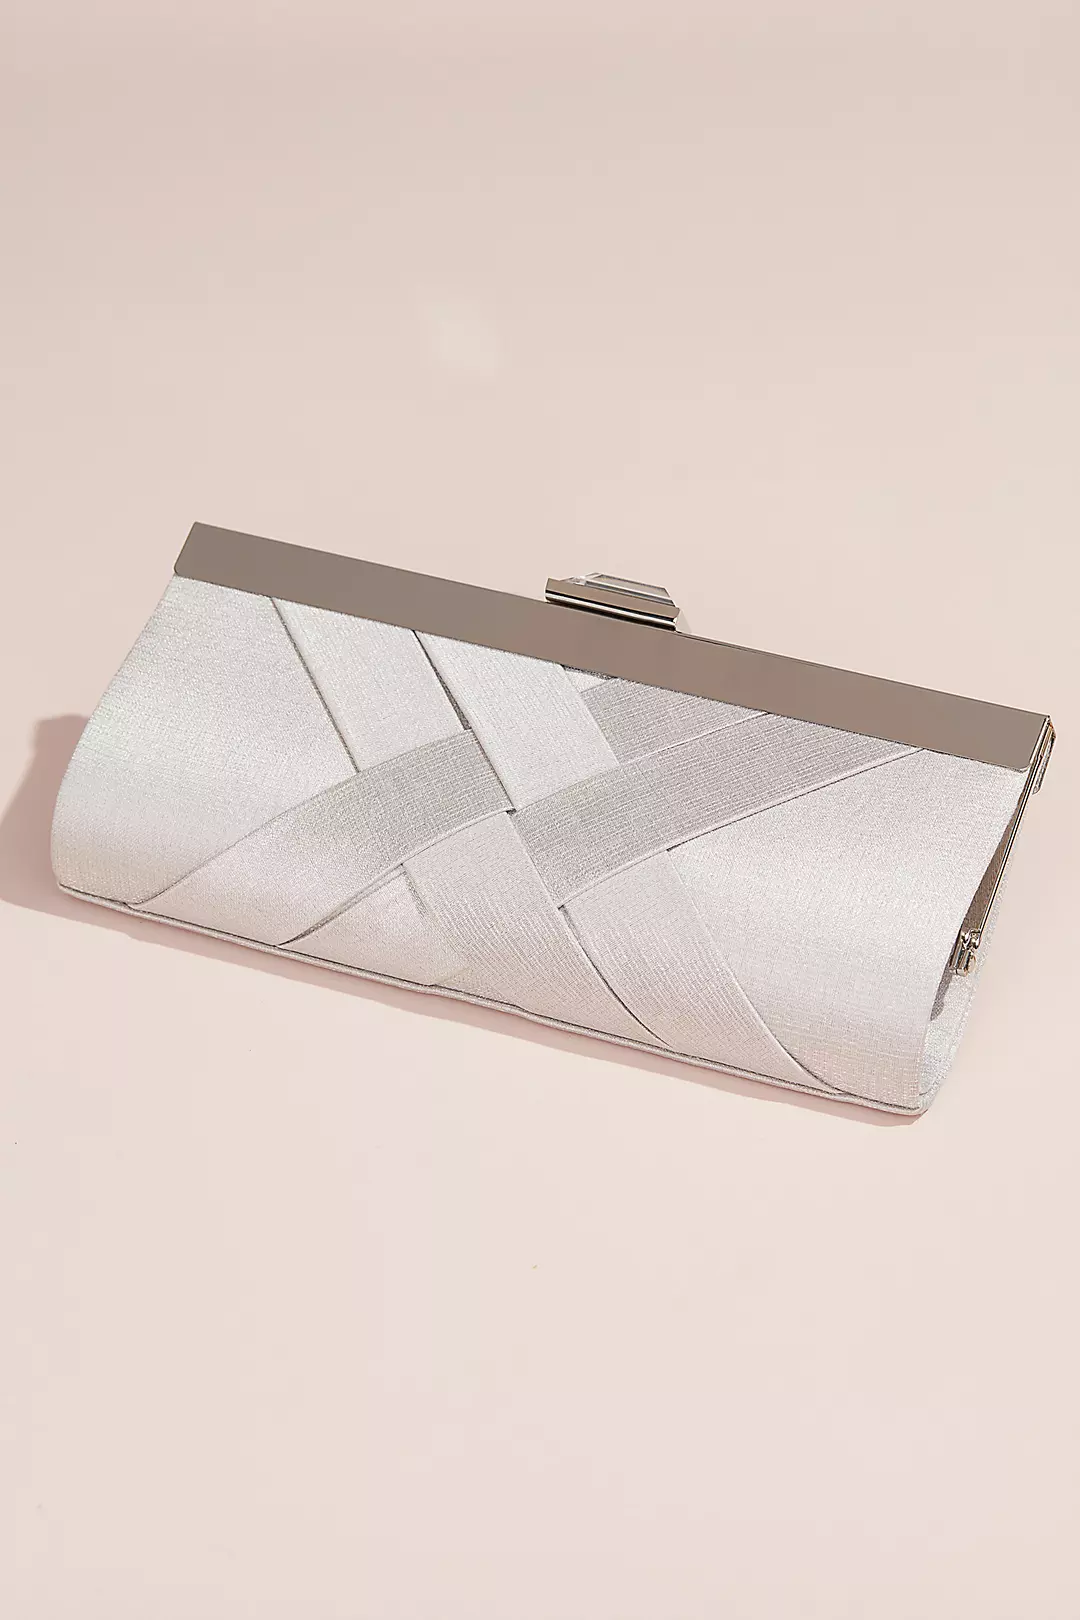 Woven Satin Frame Clutch Image